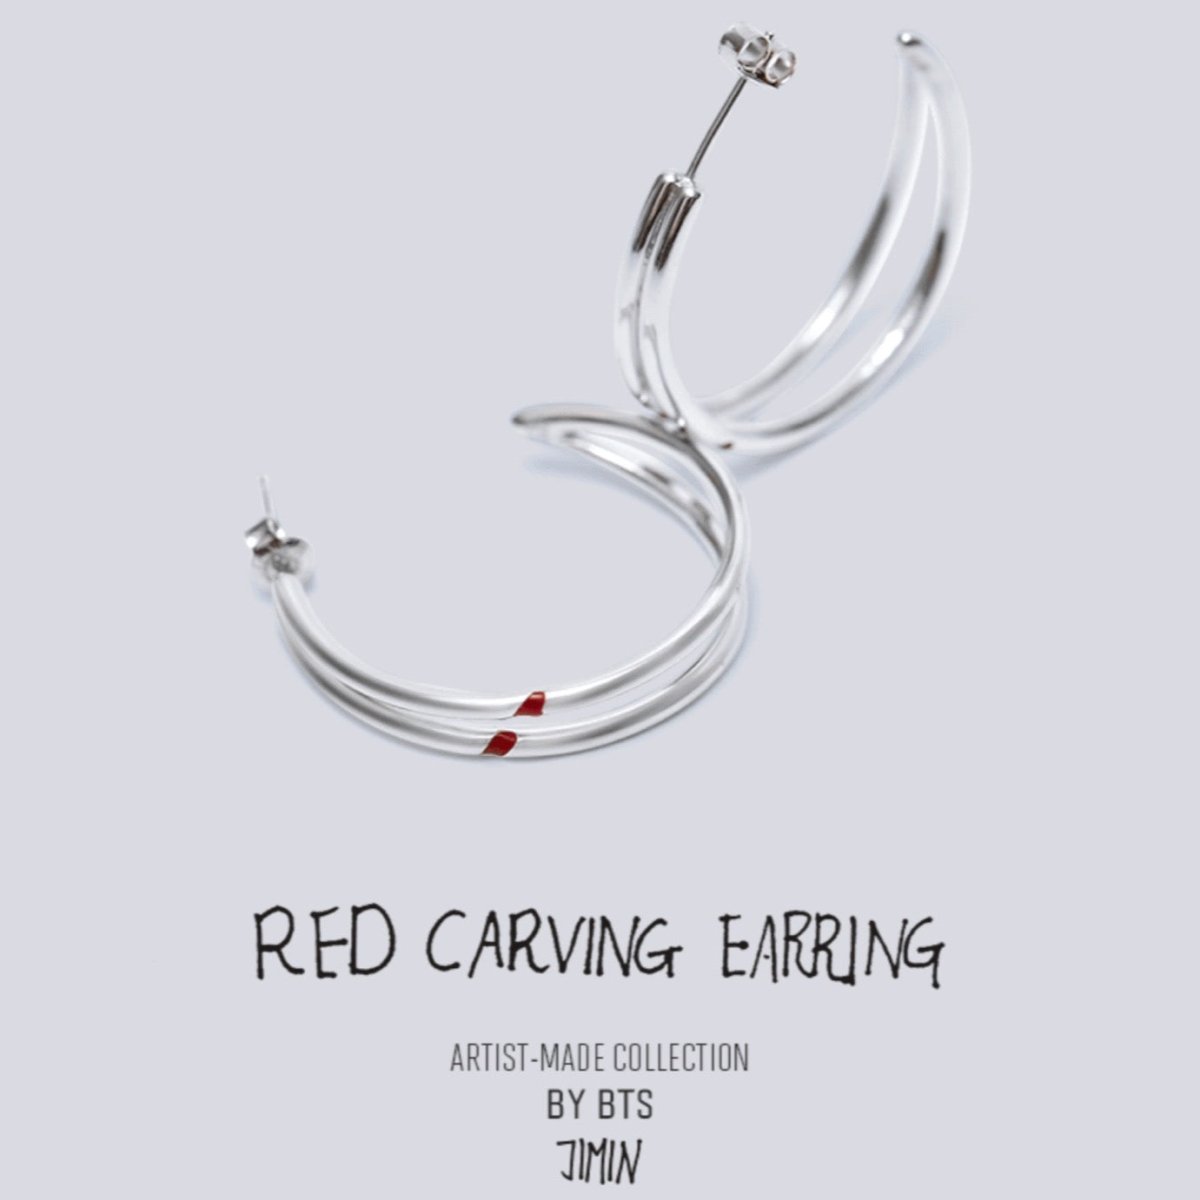 BTS JIMIN RED CARVING EARRING すぐに発送致します